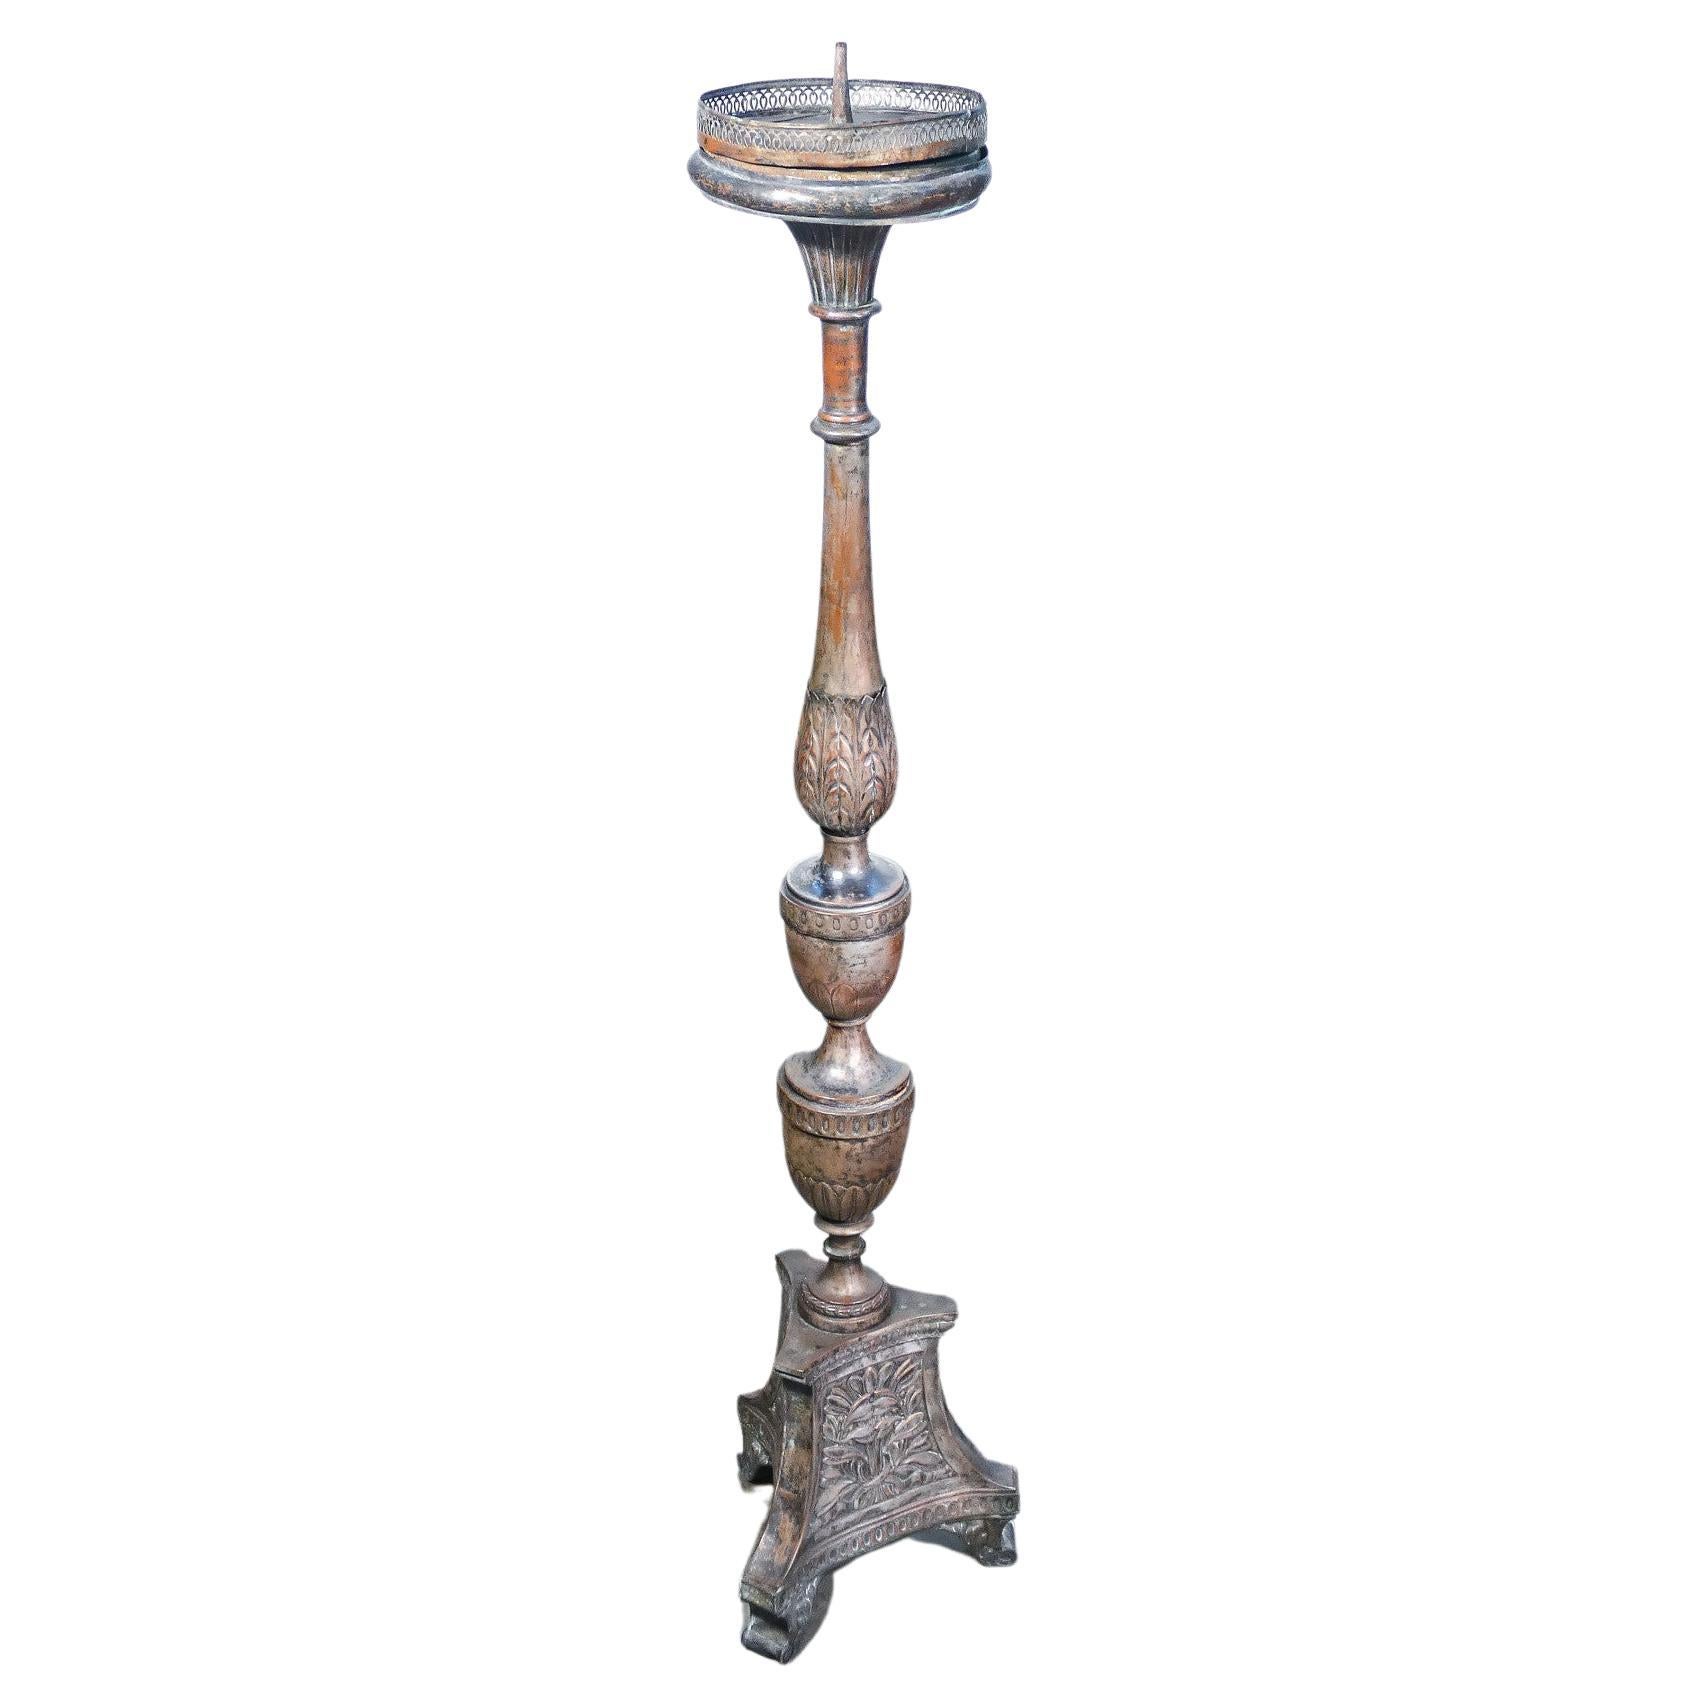 Candlestick in Silvered Copper, Embossed Decoration, Italy, 18th Century